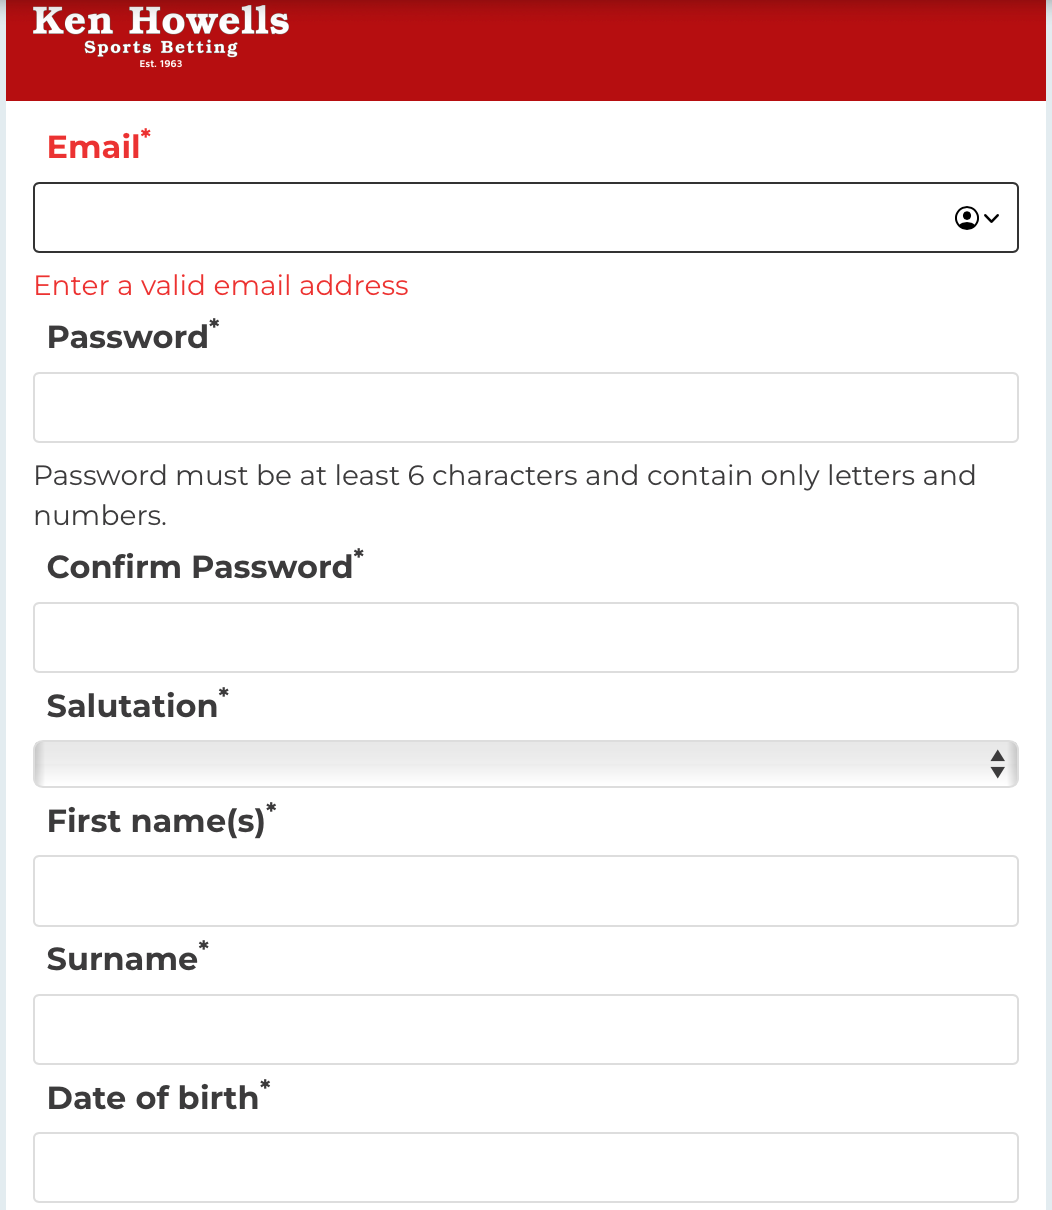 Enter your email address, choose a salutation and password, and enter your date of birth